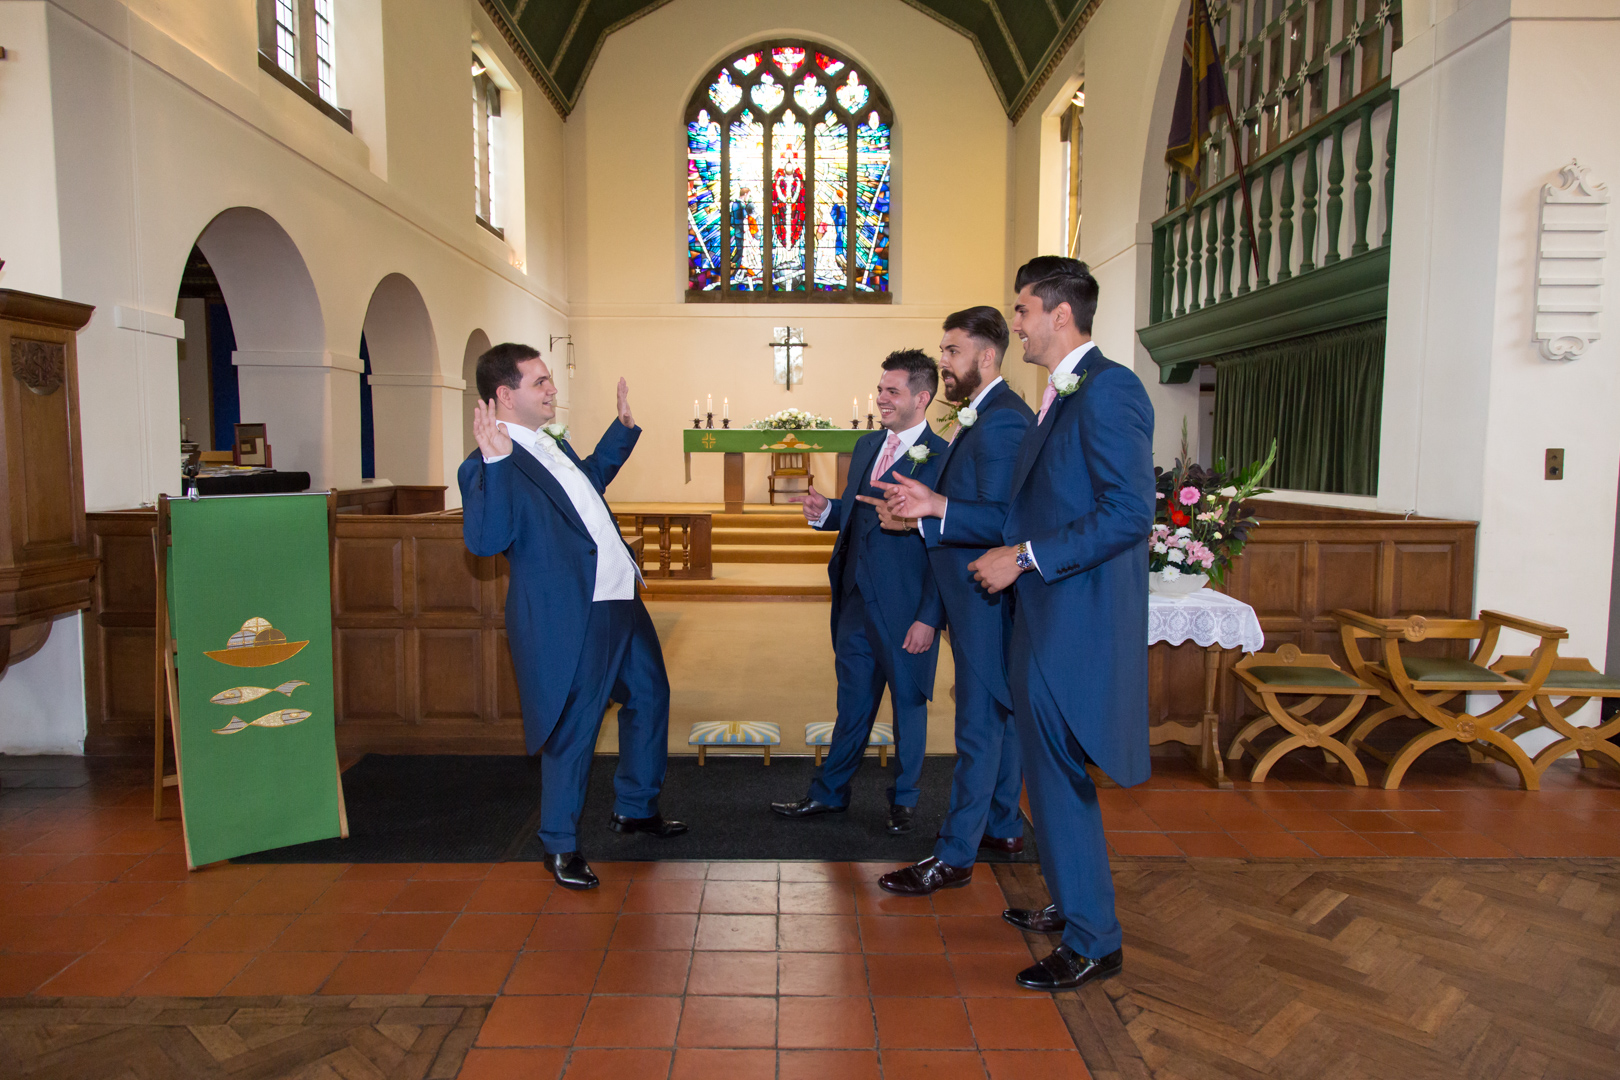 The Groom & Groomsmen photographed at St Lawrence's Church, Eastcote, Pinner Middlesex by Tim Durham of Pinner Wedding Photograph